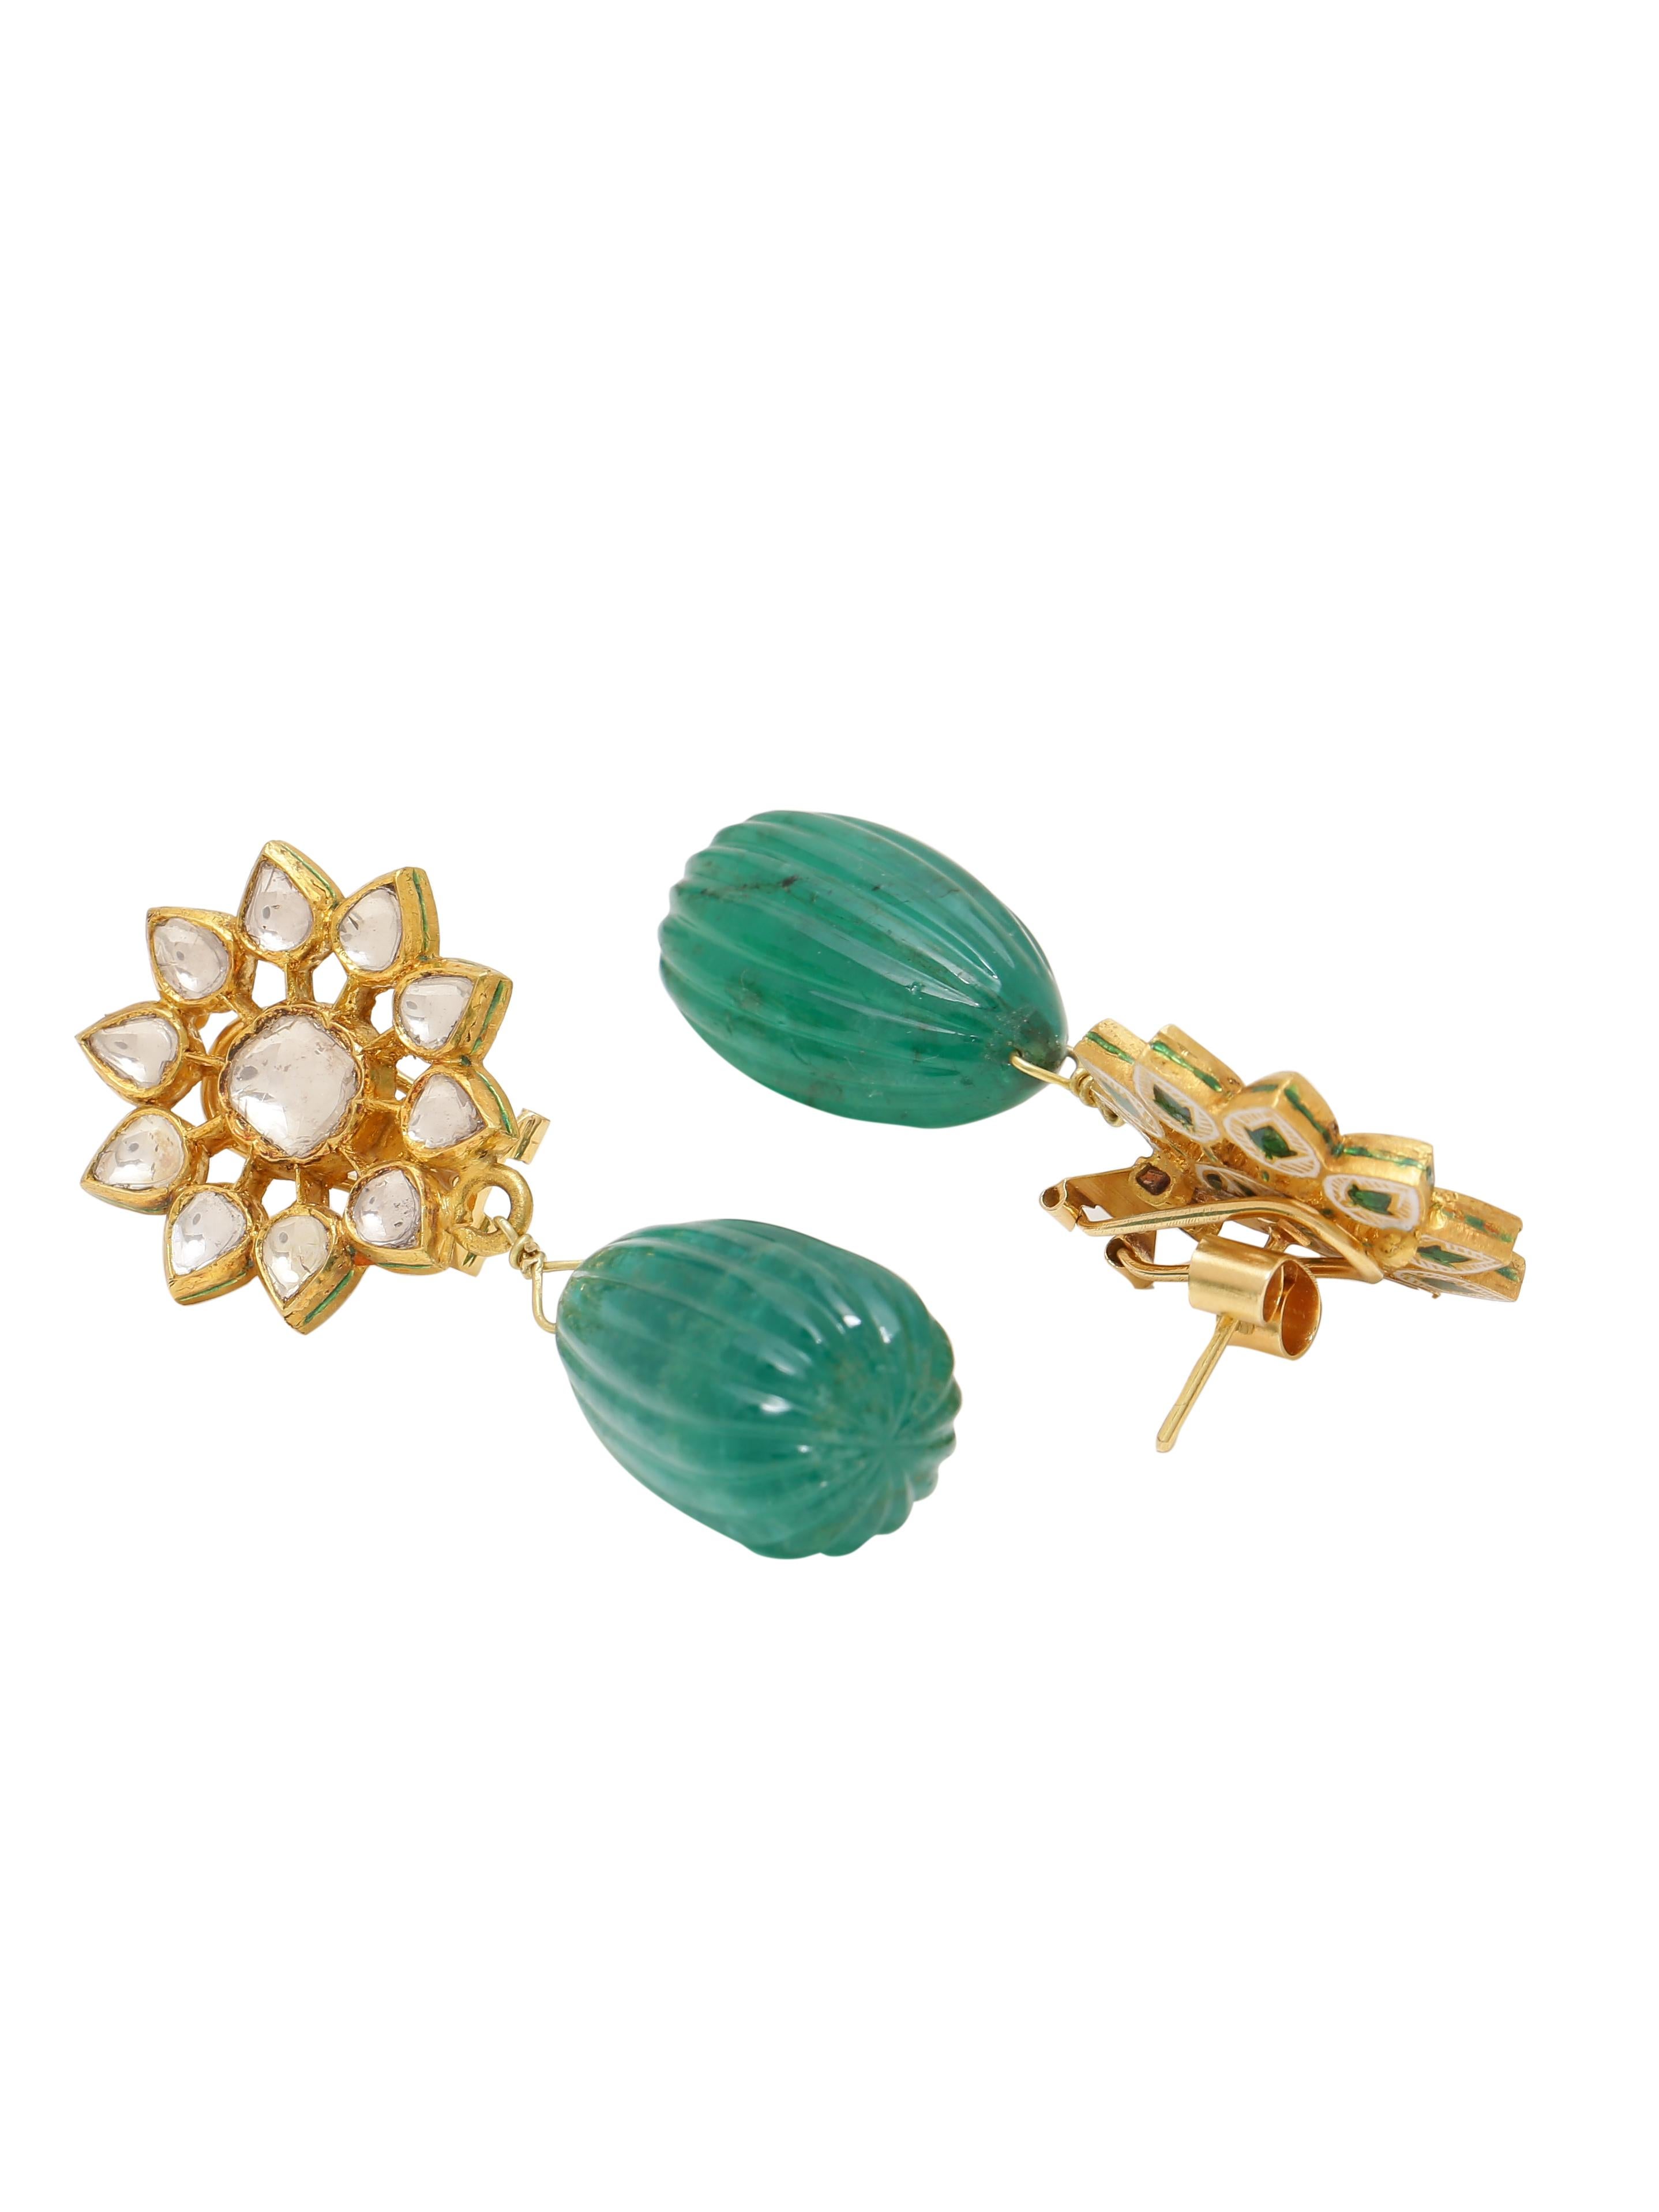 A beautiful pair of Earrings with a Flower top with Flat Diamonds set in 18k Gold and a pair of magnificent Natural Carved Emerald Drop hanging. The Emerald pair weighs 101.40 carats together and is certified from a renowned laboratory in India.
The